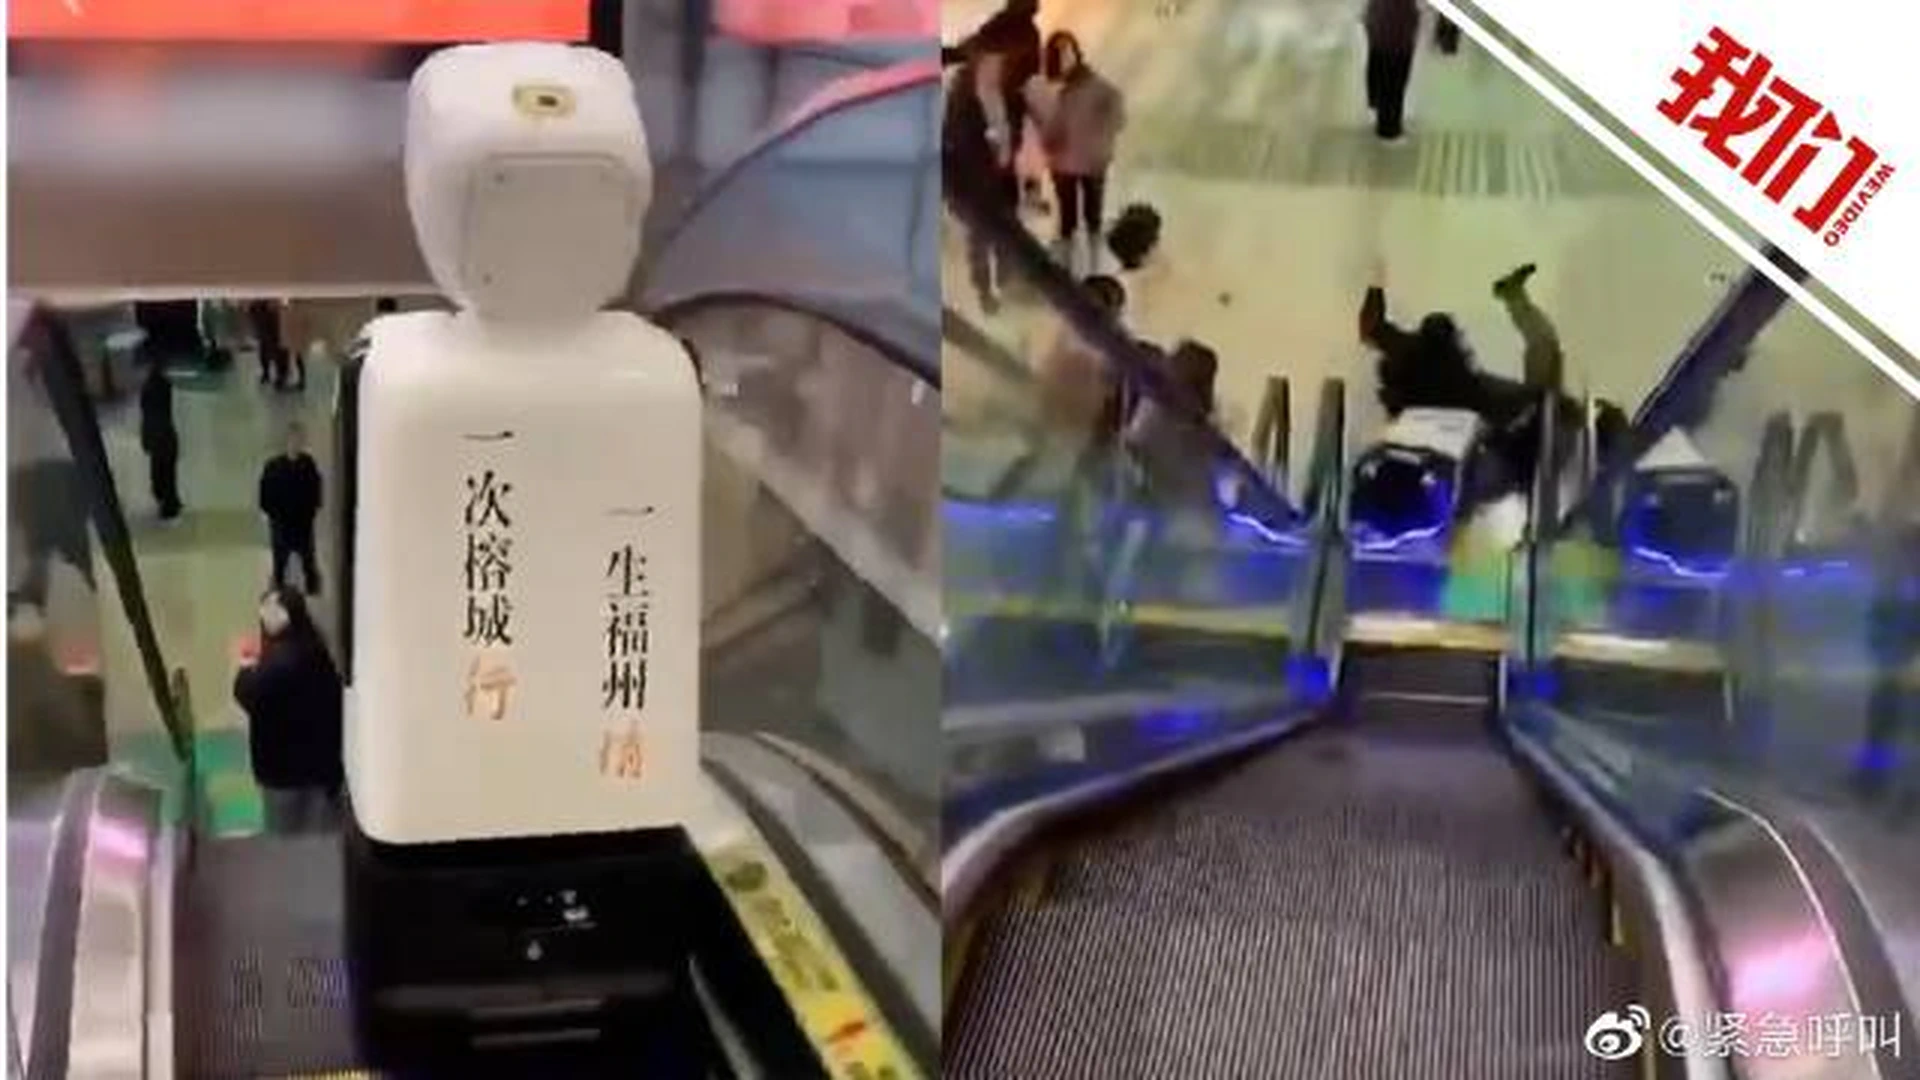 For a robot navigating a mall, the escalators may be out of scope for appropriate deployment. An incidentin which the robot finds itself traveling down an escalator is a violation of scope that is readily identifiable to all present, but for the engineering and assurance of the system, data defining the escalator as out of bounds requires collection and structuring. With data that properly characterizes the operating scope, the system can be continuously tested for its potential to exit the scope and whether the system detects the dangerous state if an exit occurs.